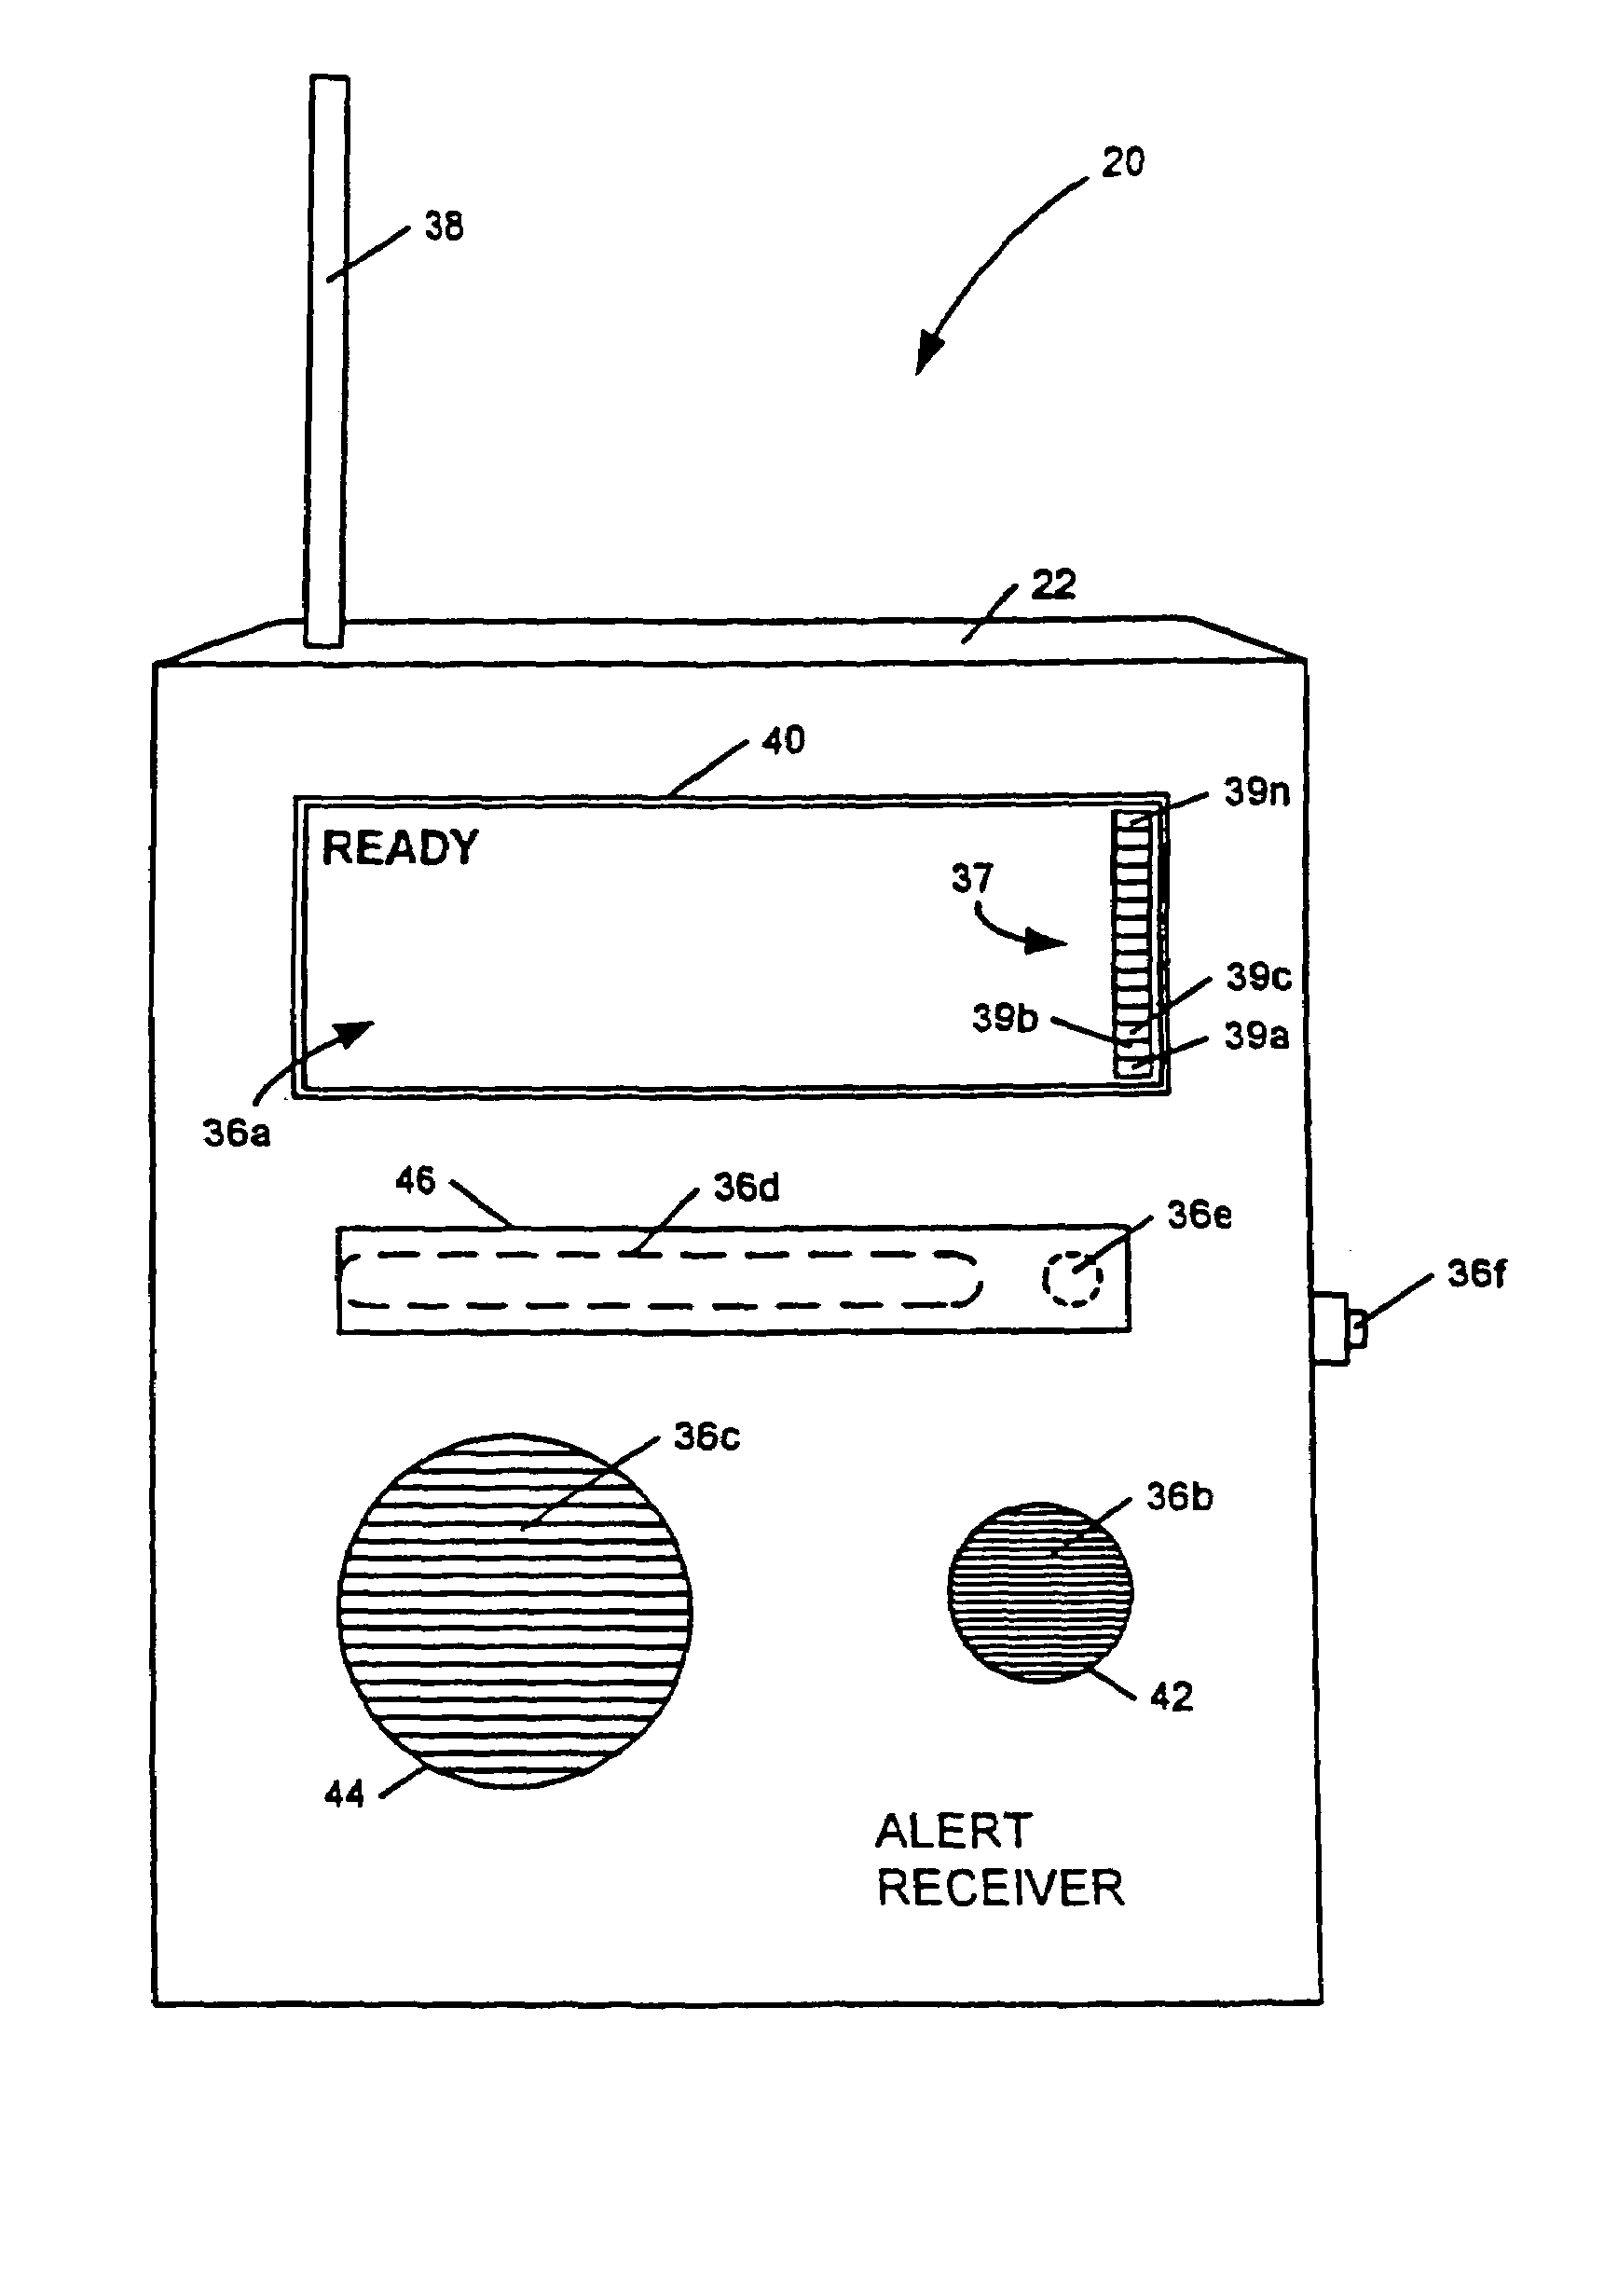 Apparatus and method for providing weather and other alerts